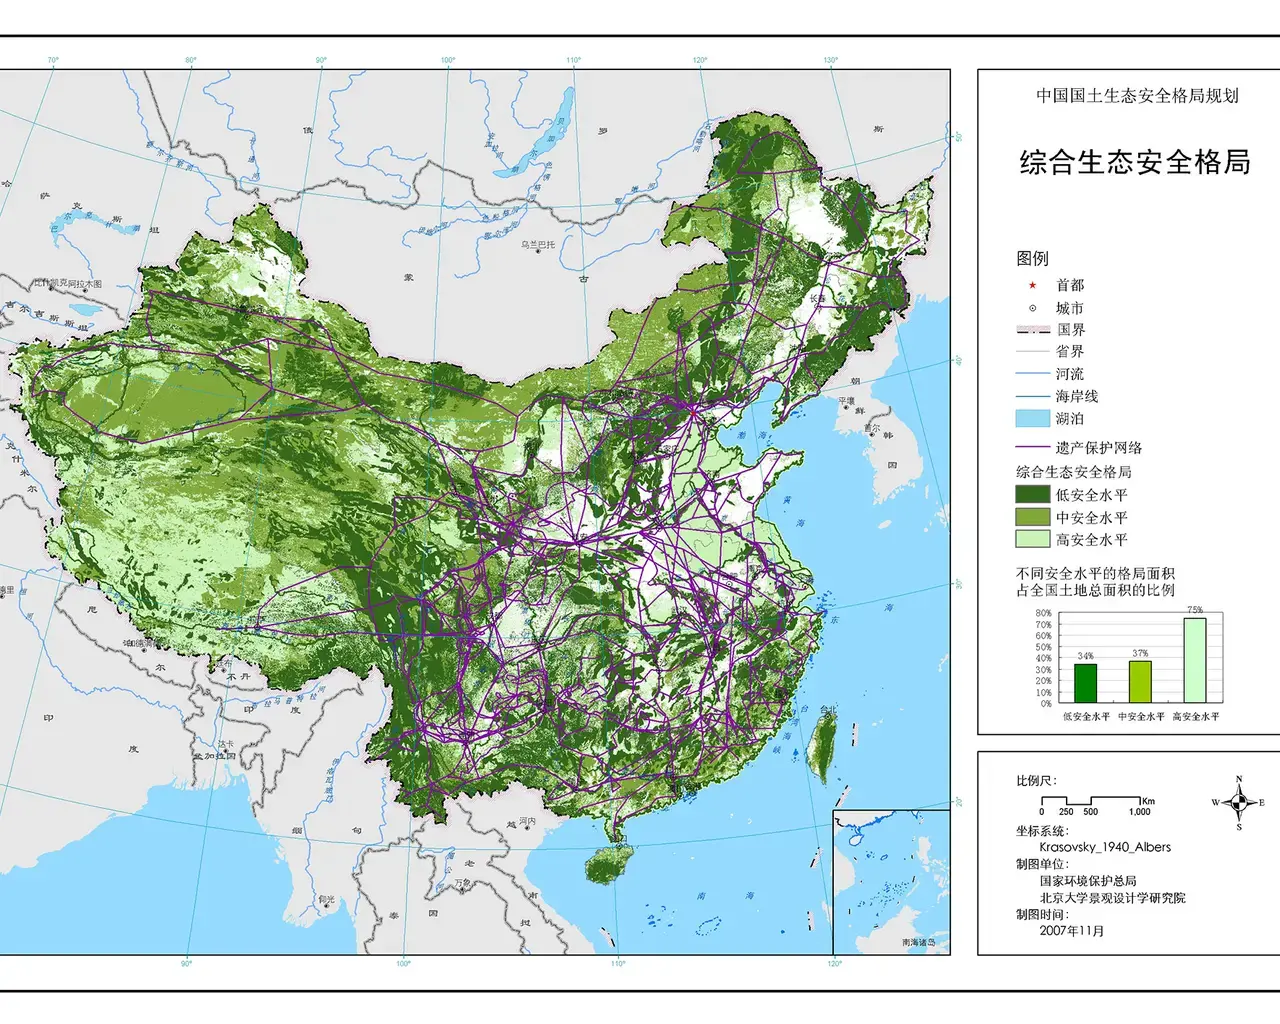 Design With Nature Now, National Ecological Security Patterns, 2010, China. Photo courtesy of Turenscape.&nbsp;